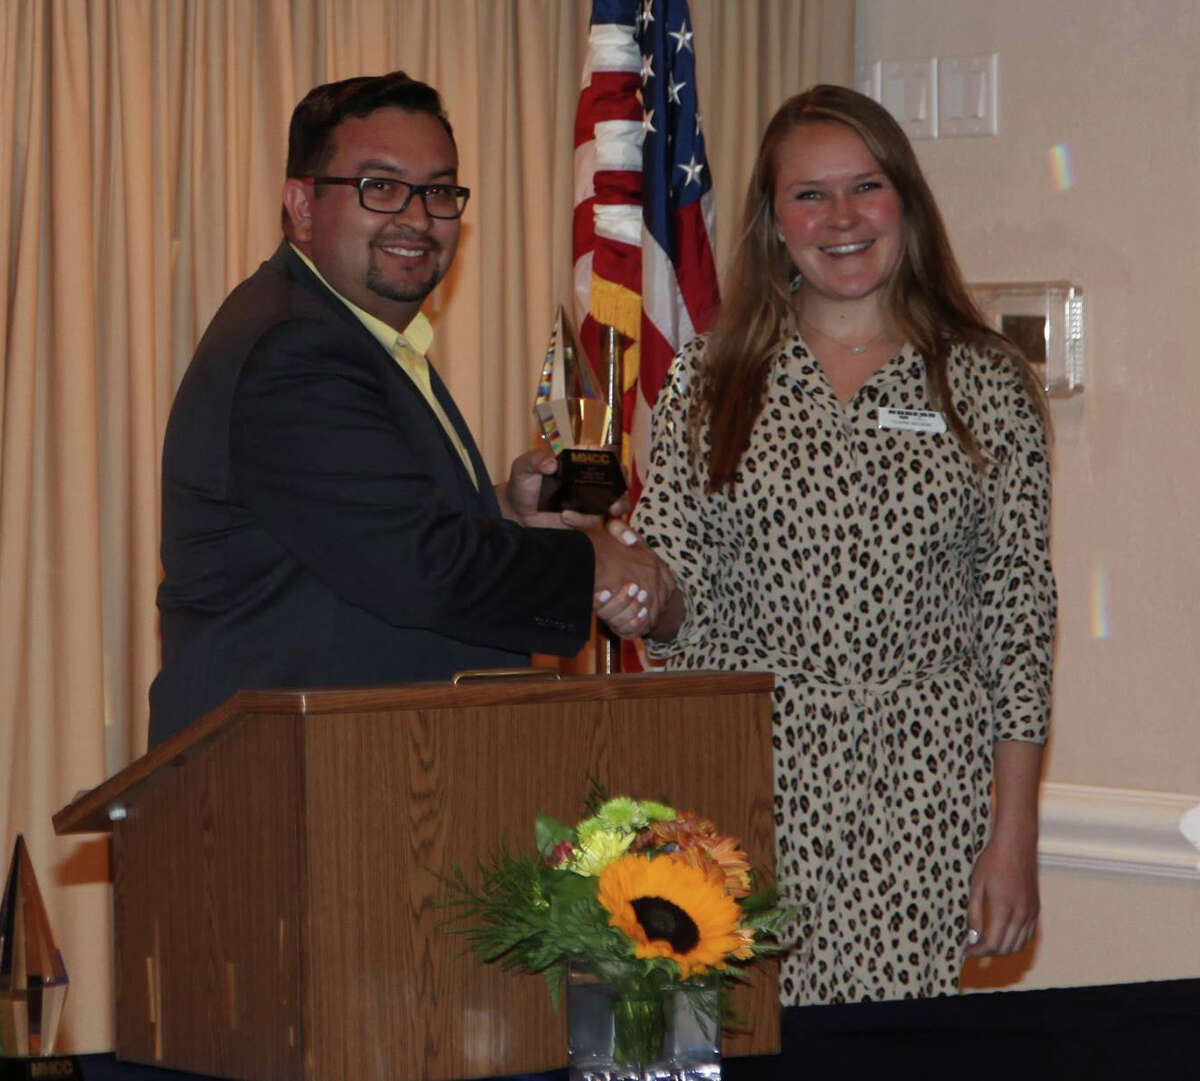 The Midland Hispanic Chamber of Commerce on Oct. 31 named Rogers Ford corporation of the year at the chamber's annual meeting. MHCC board member Eddie Montoya, left, presented Claire Nelson, Rogers Ford advertising and internet sales manager, the award.